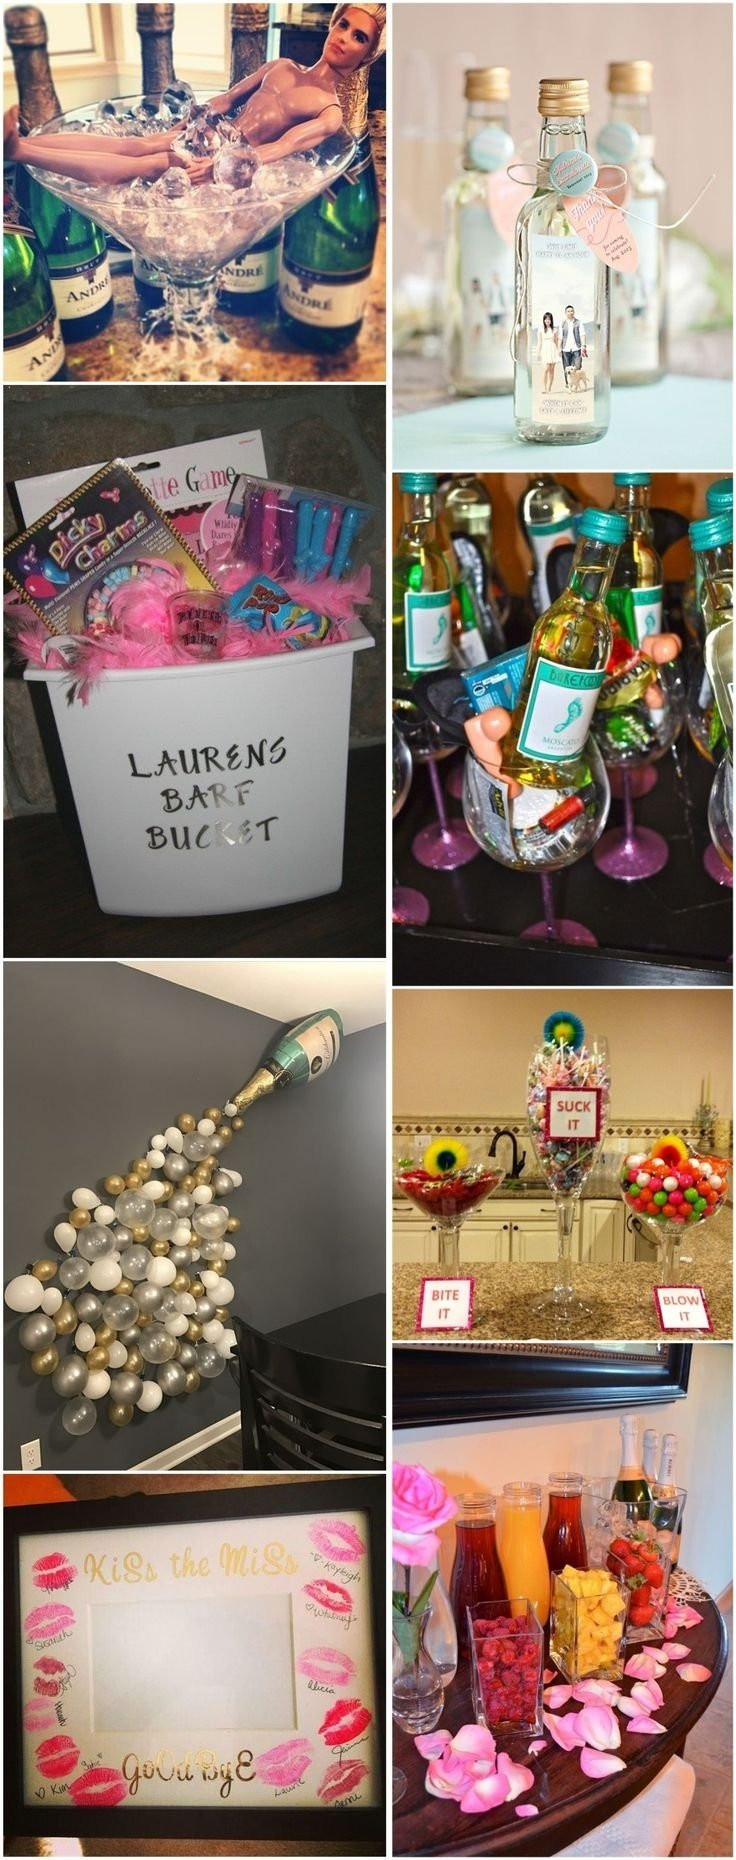 Bachelorette Party Ideas New England
 10 Ideal New England Bachelor Party Ideas 2019